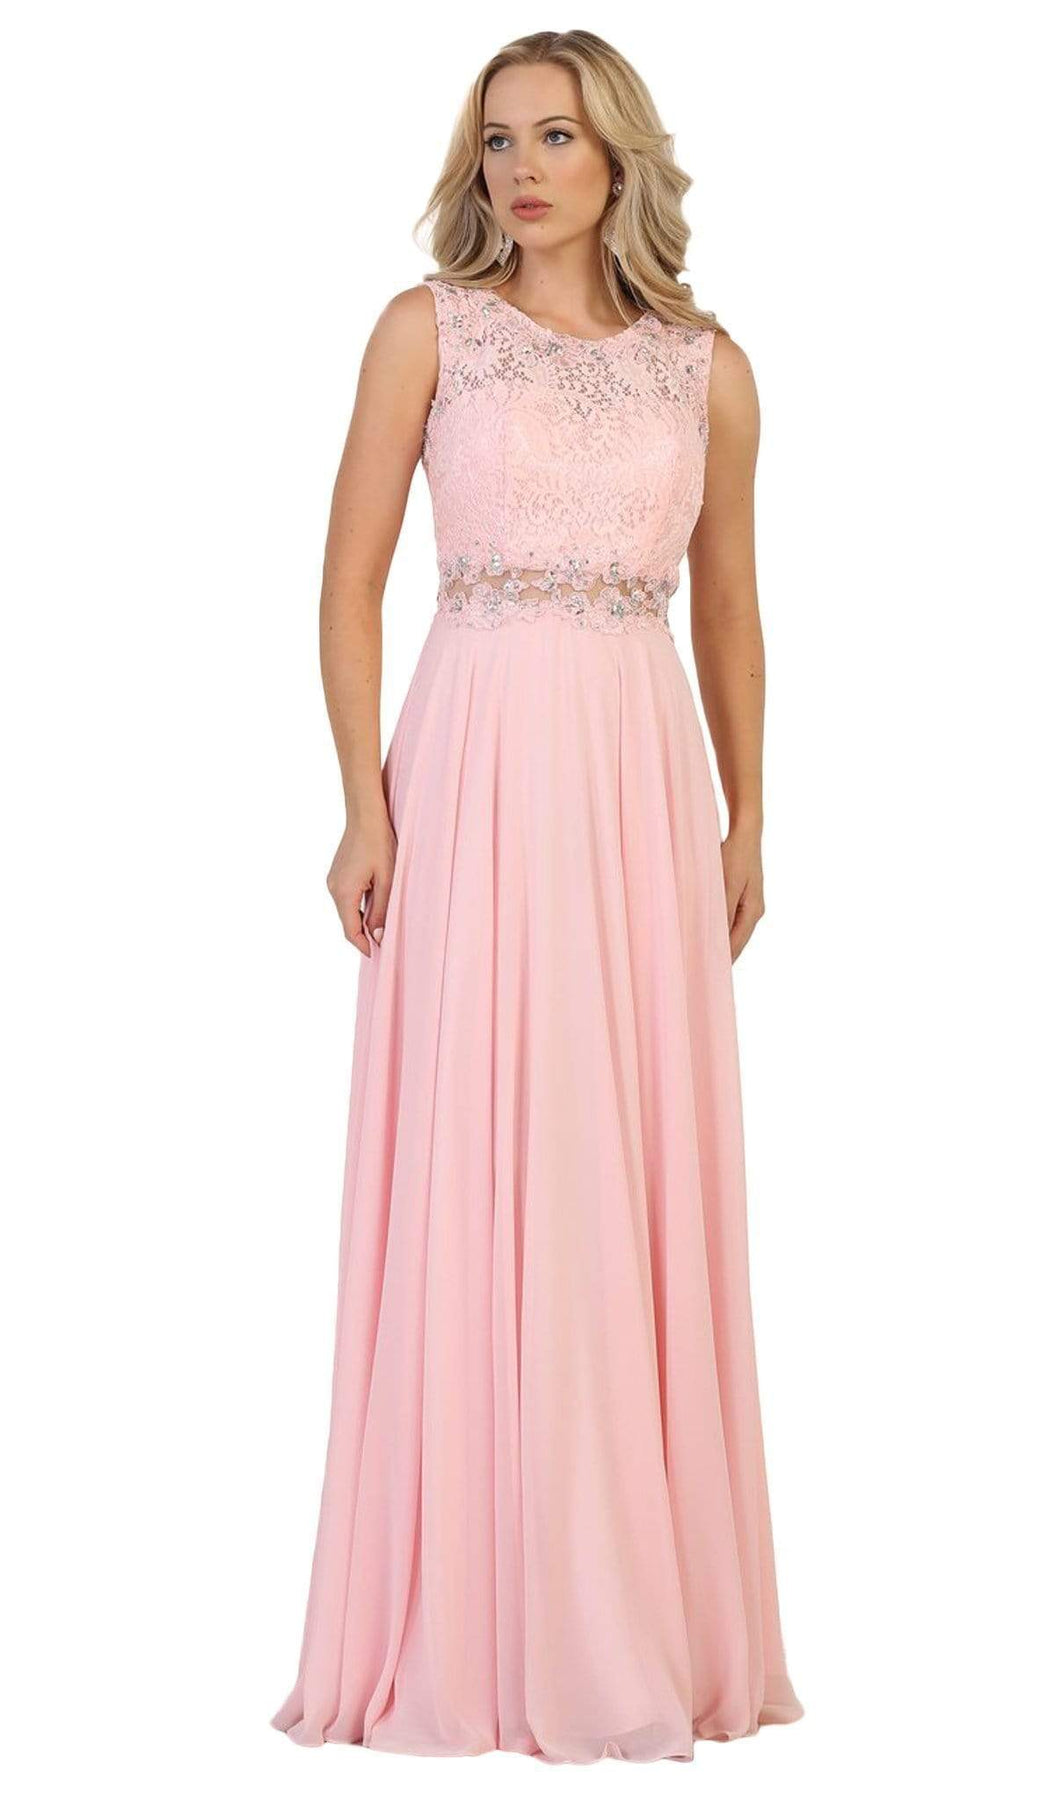 May Queen - Embellished Lace Pleated Prom Dress Bridesmaid Dresses 4 / Blush